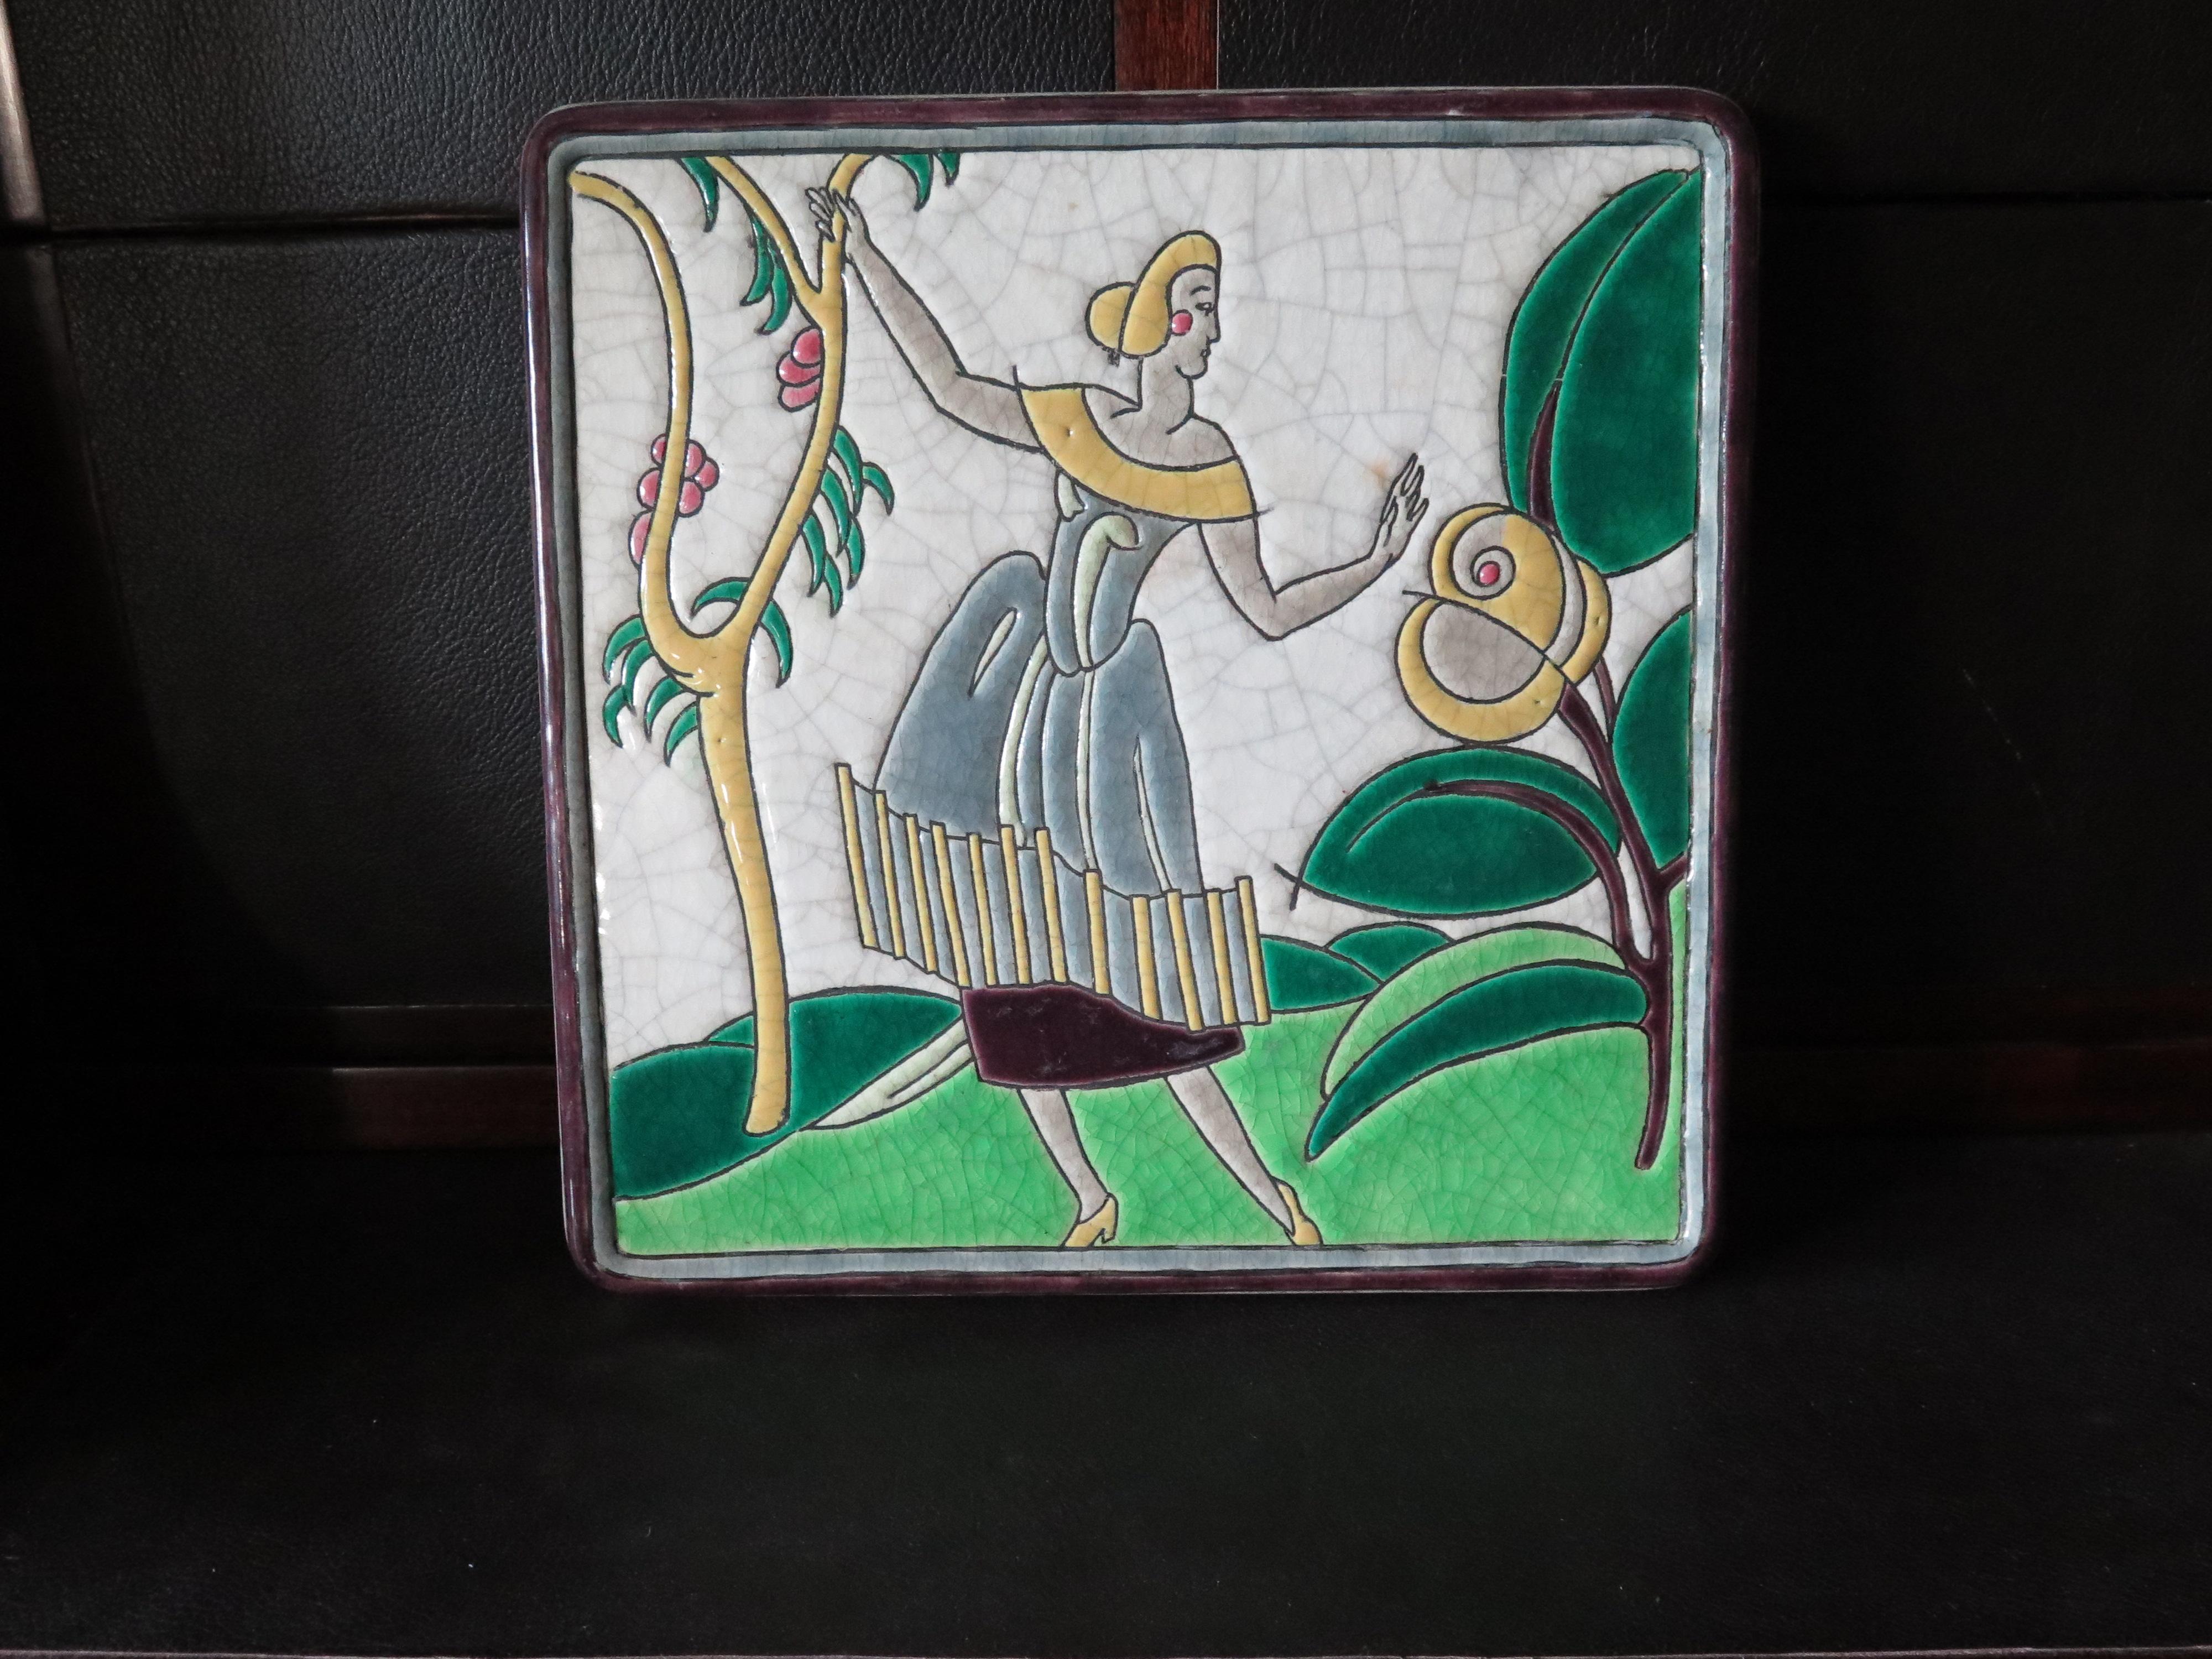 A fabulous Primavera/Longwy 1920's Art Deco charger or wall plaque (has wall mounts on the back). Stylized portrait of a woman in a landscape. Vibrant colors, crackling effect add to this piece's charm.